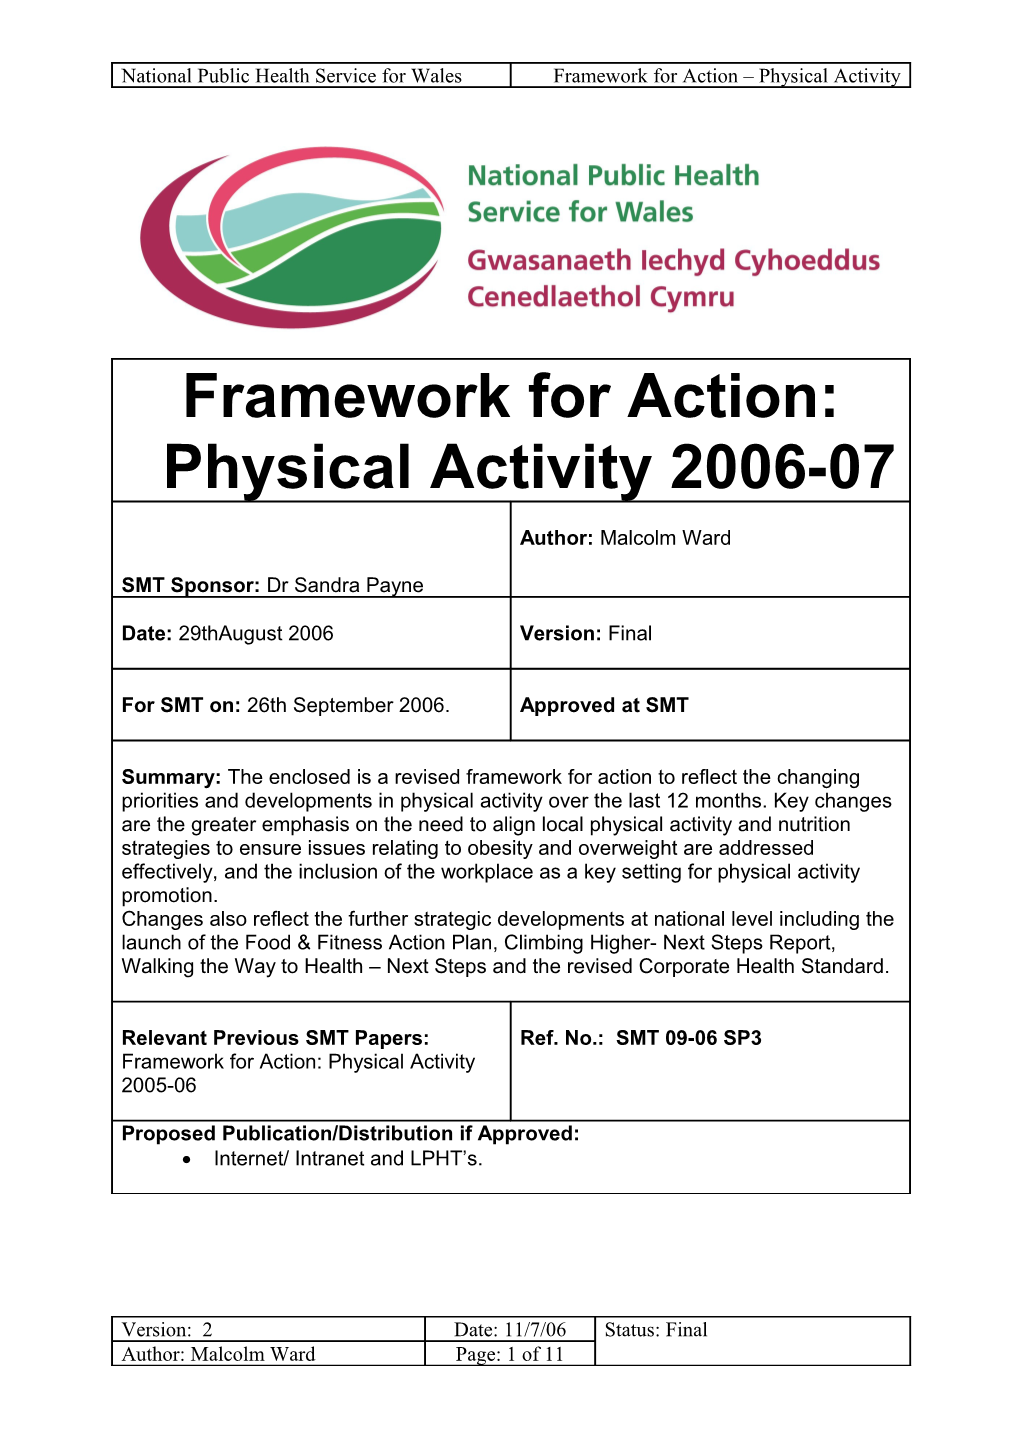 Framework for Action: Physical Activity 2006-07